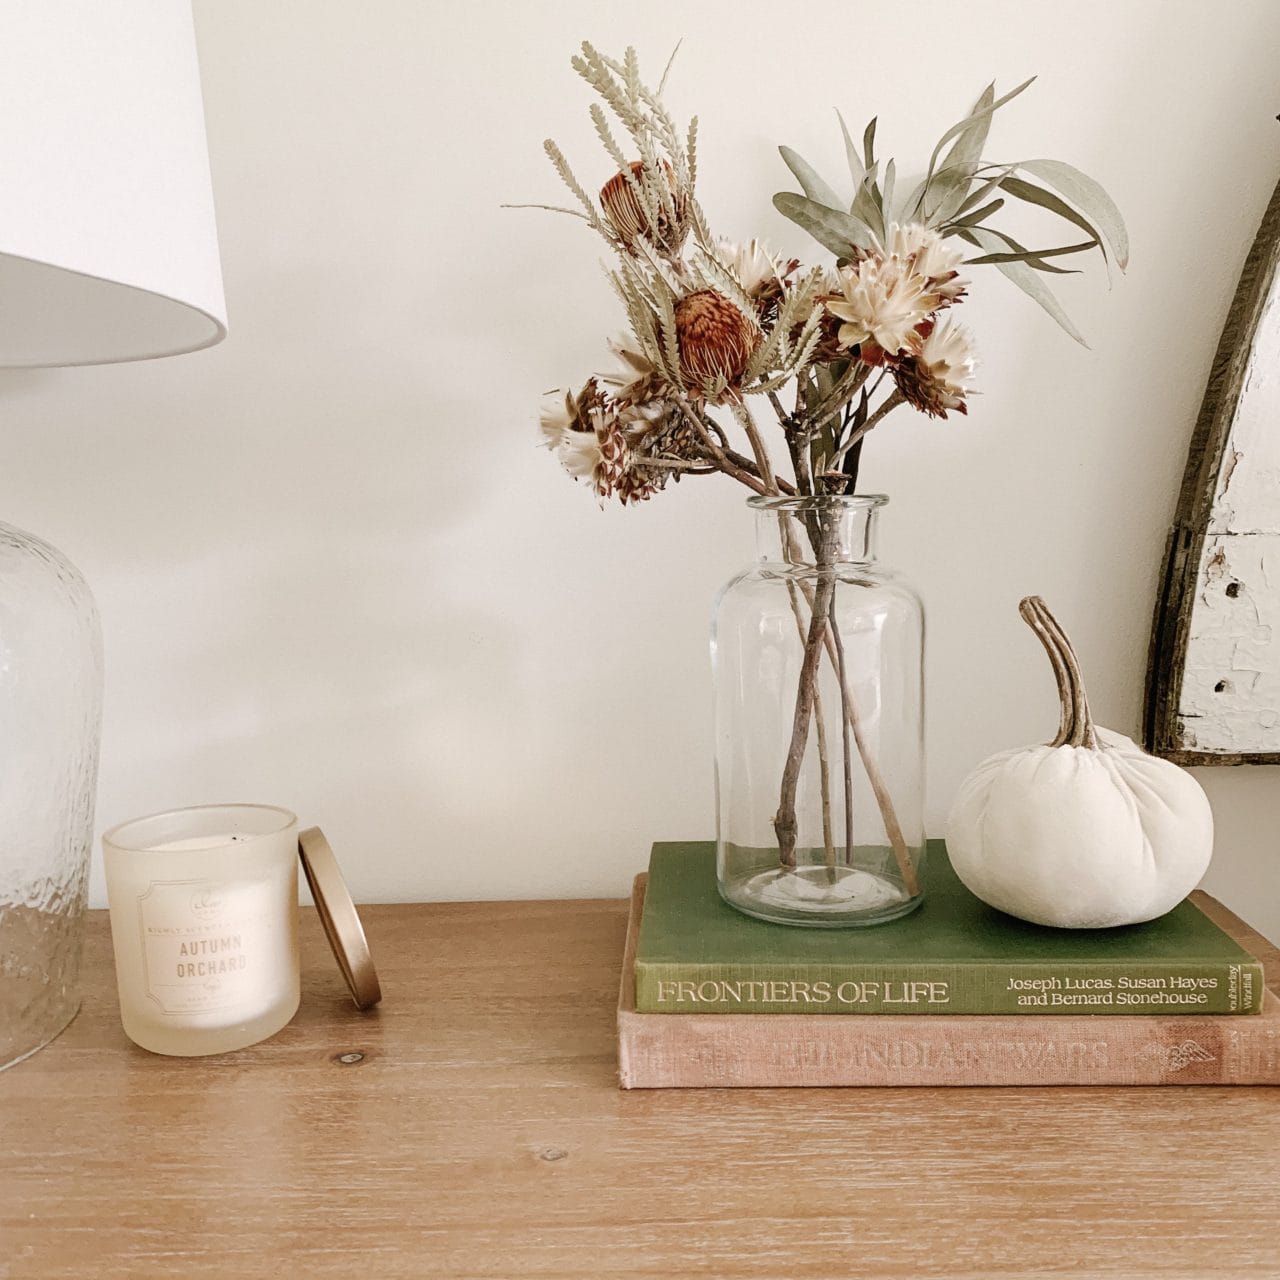 Decorate Nightstands for Fall